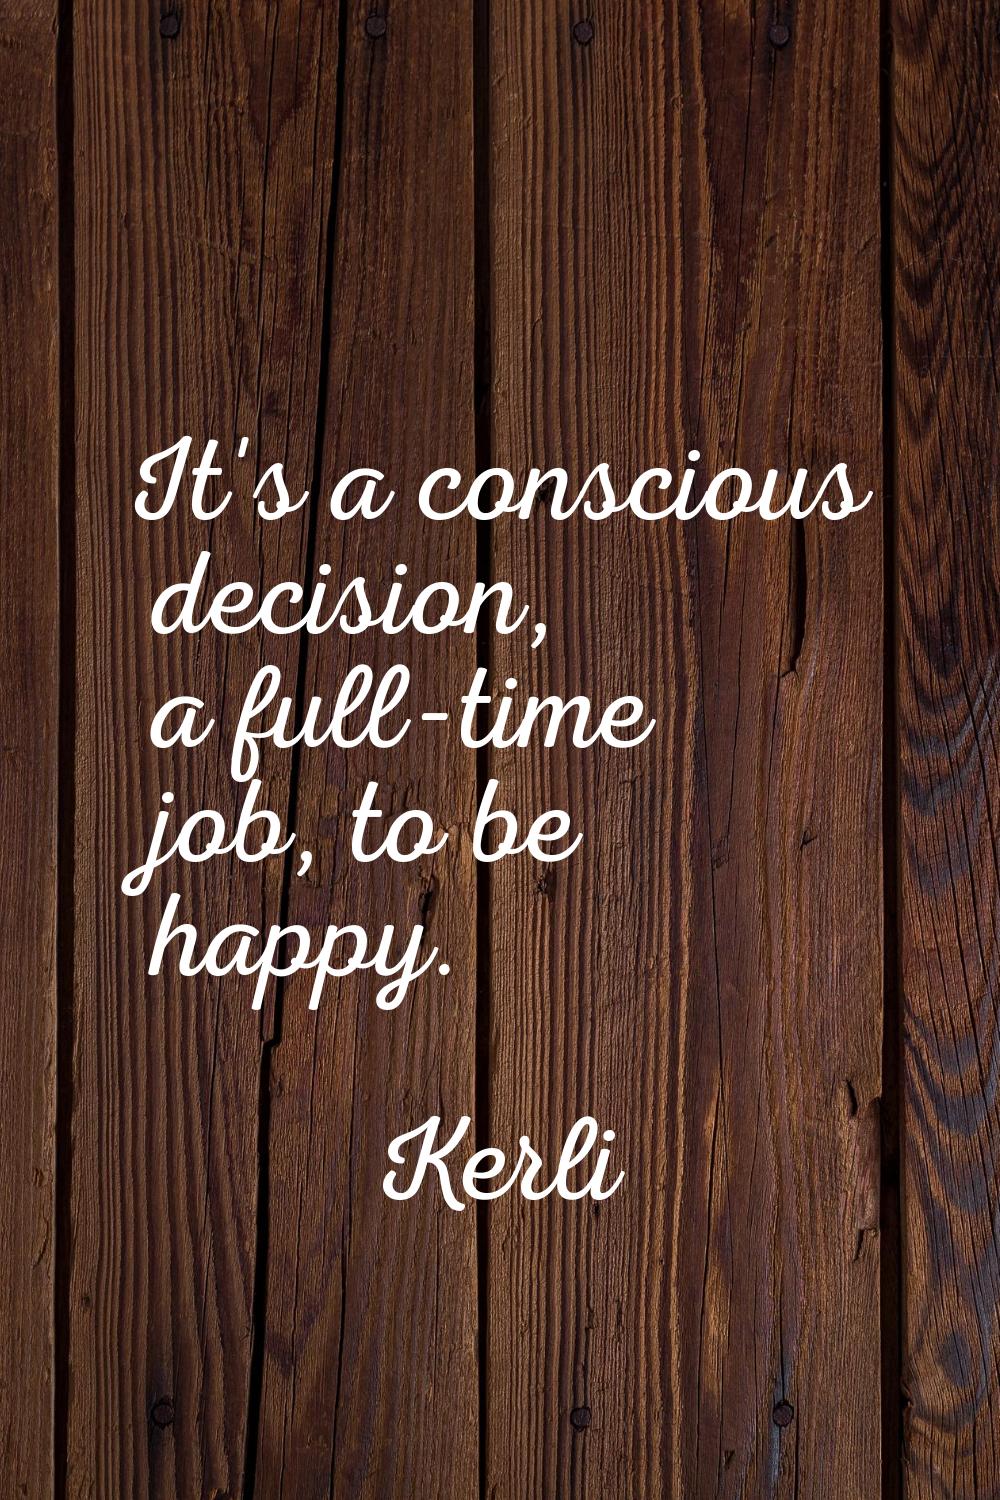 It's a conscious decision, a full-time job, to be happy.